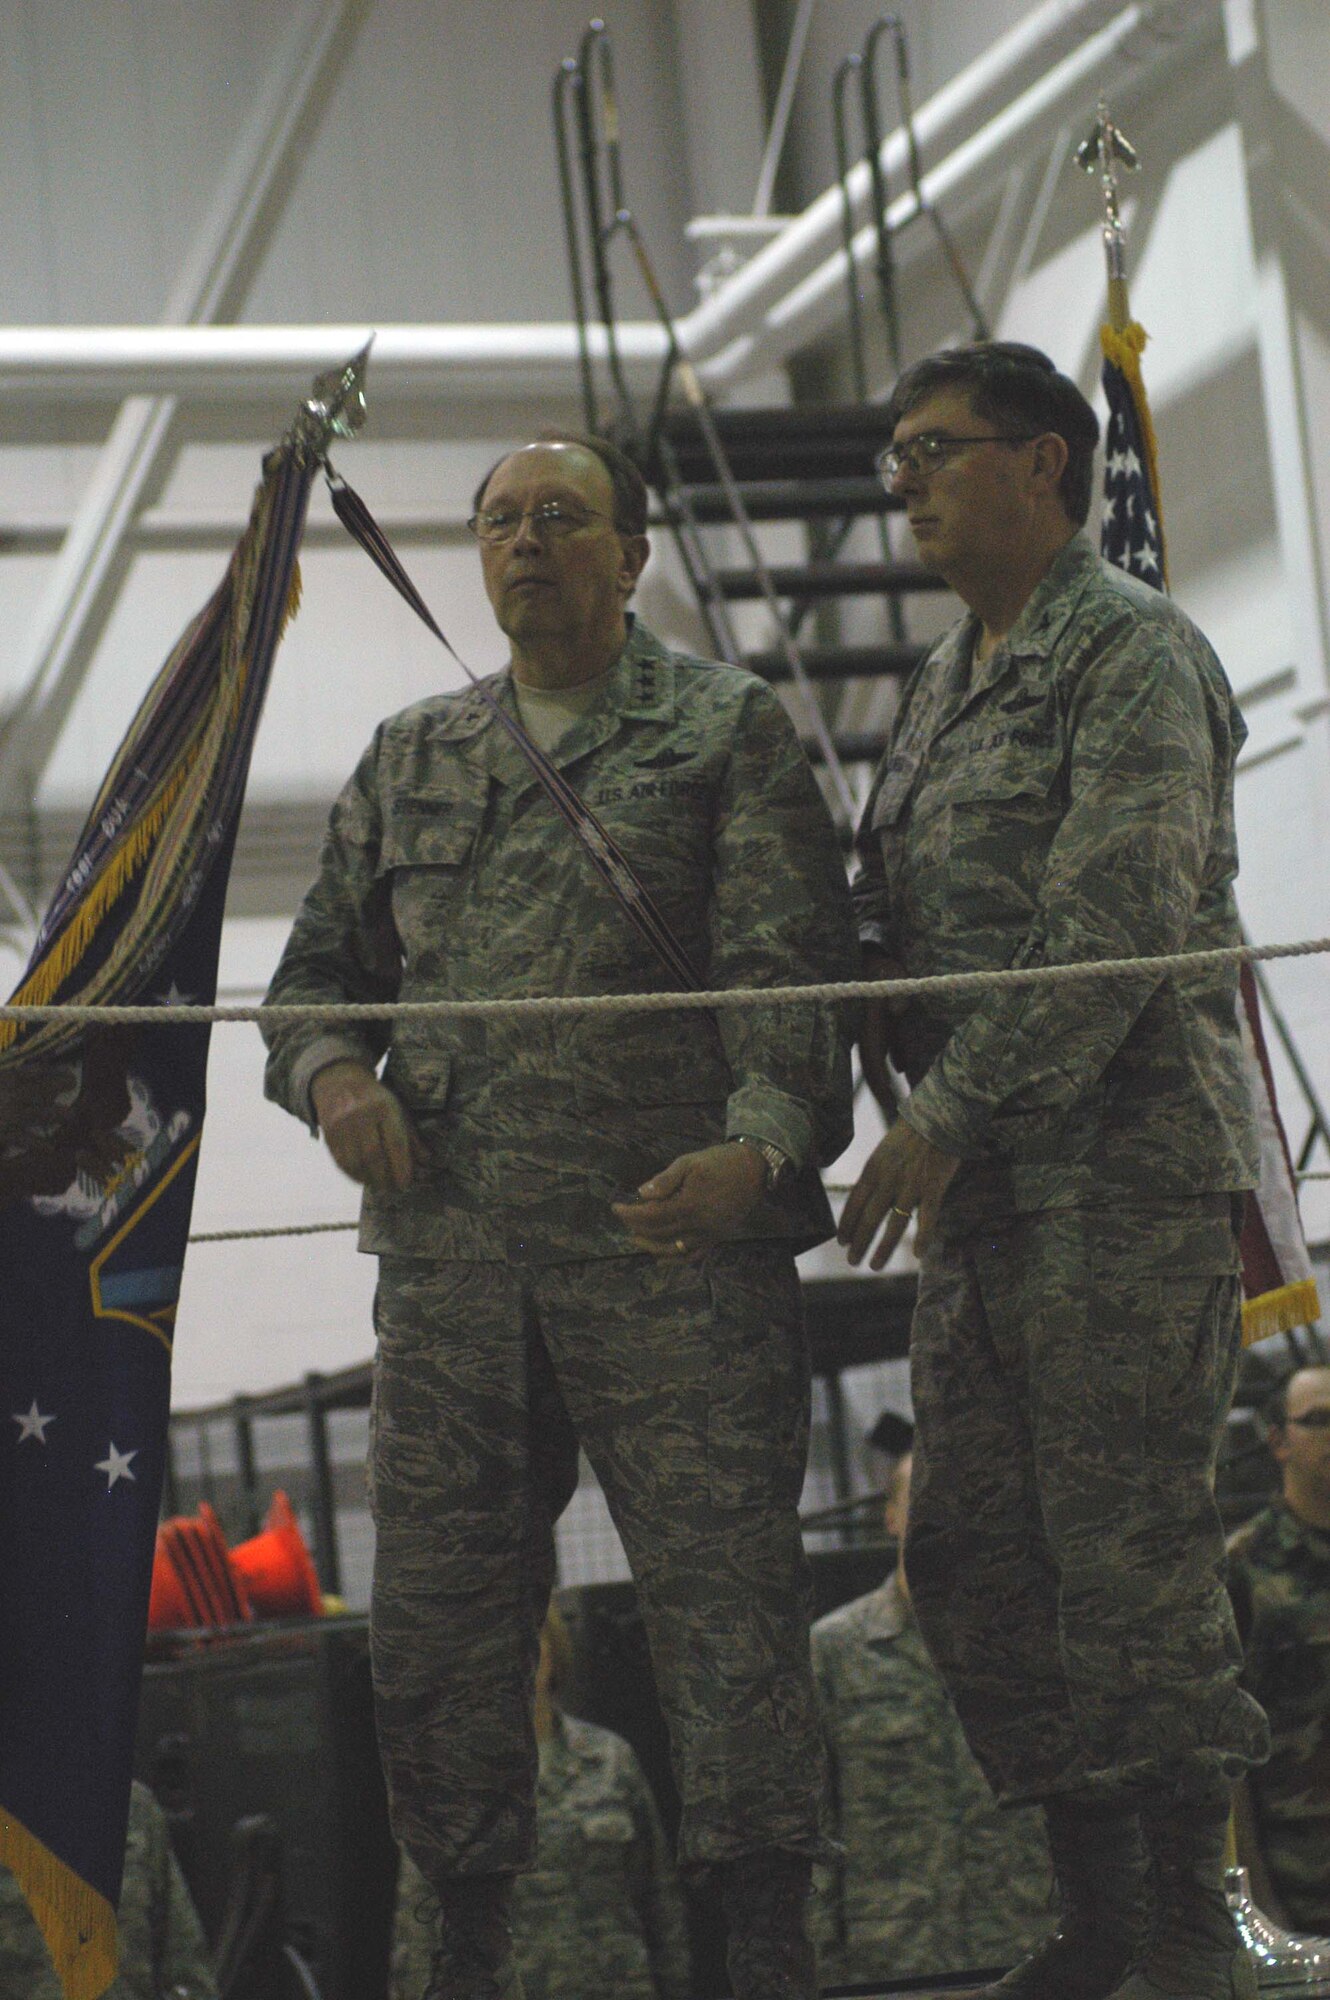 Lt. Gen. Charles E. Stenner Jr., Chief of Air Force Reserve, Headquarters U.S. Air Force, Washington, D.C., and Commander, Air Force Reserve Command, Robins Air Force Base, Ga., along with Col. Gordon H. Elwell, Jr., 911th Airlift Wing commander, attach the Wings' Outstanding Unit Award ribbon on the Wing flag during a commander's call here, March 8, 2009. (photo by Senior Airmen Jamie Perry)